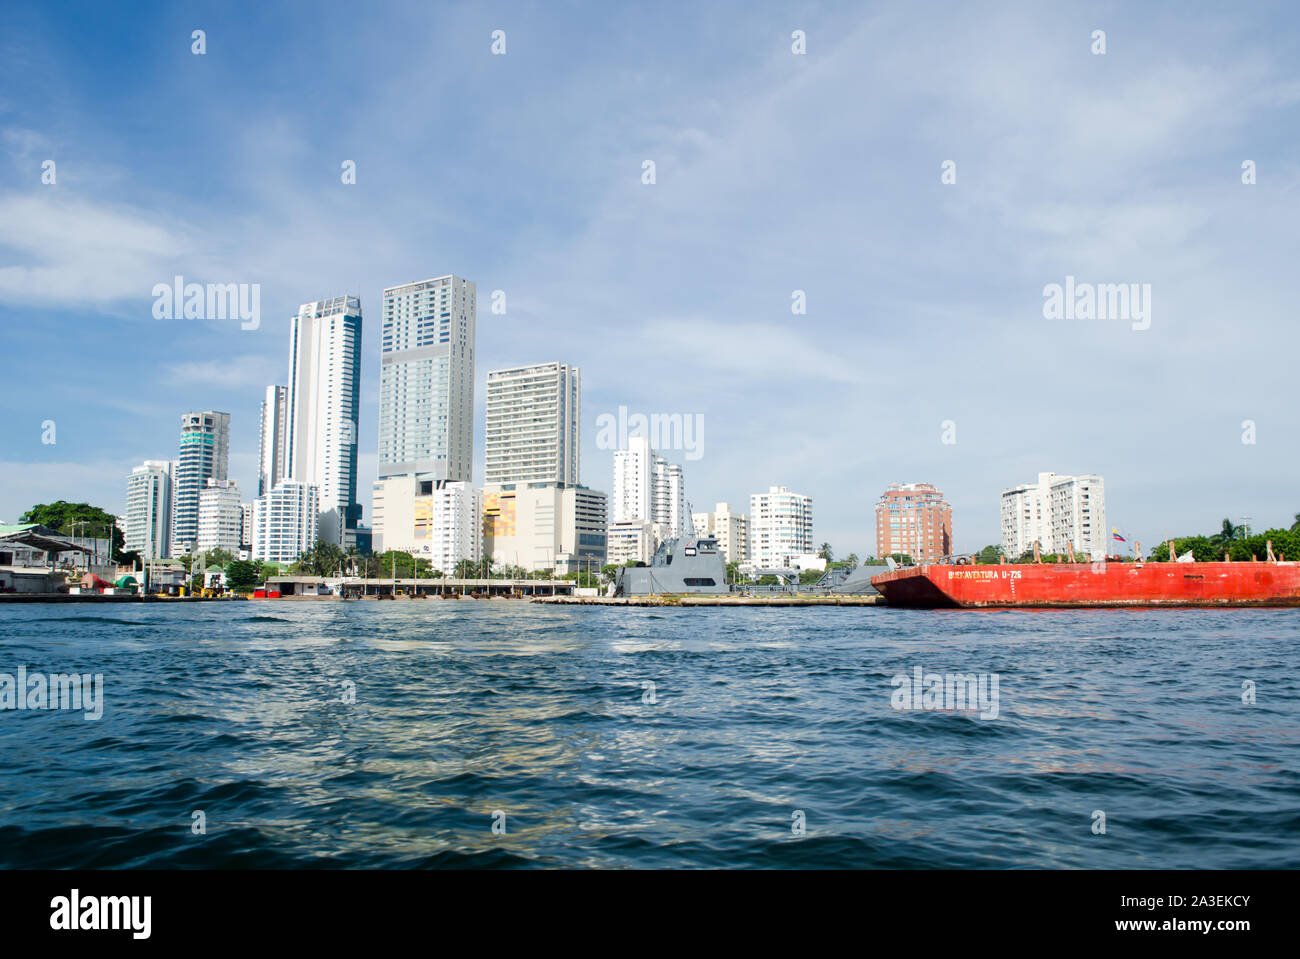 Bocagrande skyline as seen from the bay Stock Photo